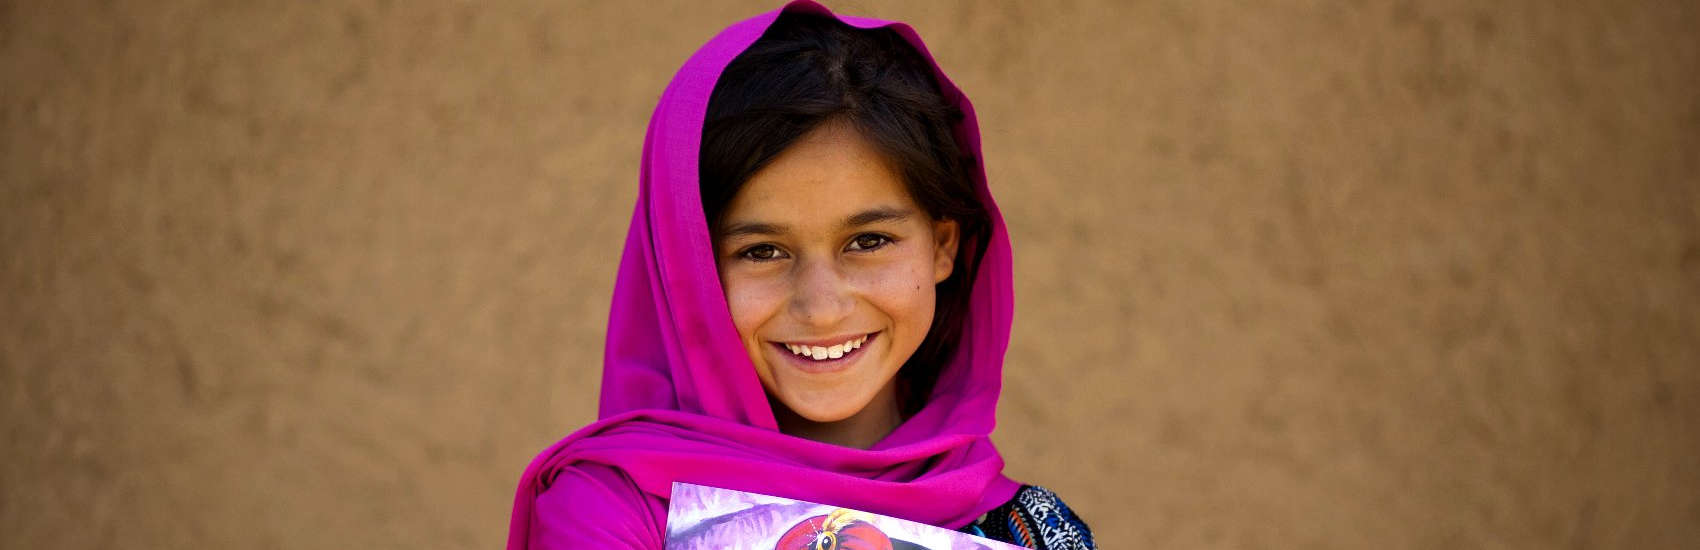 9-year old Najma holds a book and smiles outside her home in Pakistan. Najma participates in a reading “buddy program,” where she helps another child with reading in and outside of school. The buddy program is part of Save the Children’s Literacy Boost initiative, which includes assessments, teacher training and community action, to significantly improve children’s core reading skills. Photo credit: Asad Zaidi/Save the Children, January 2015. 